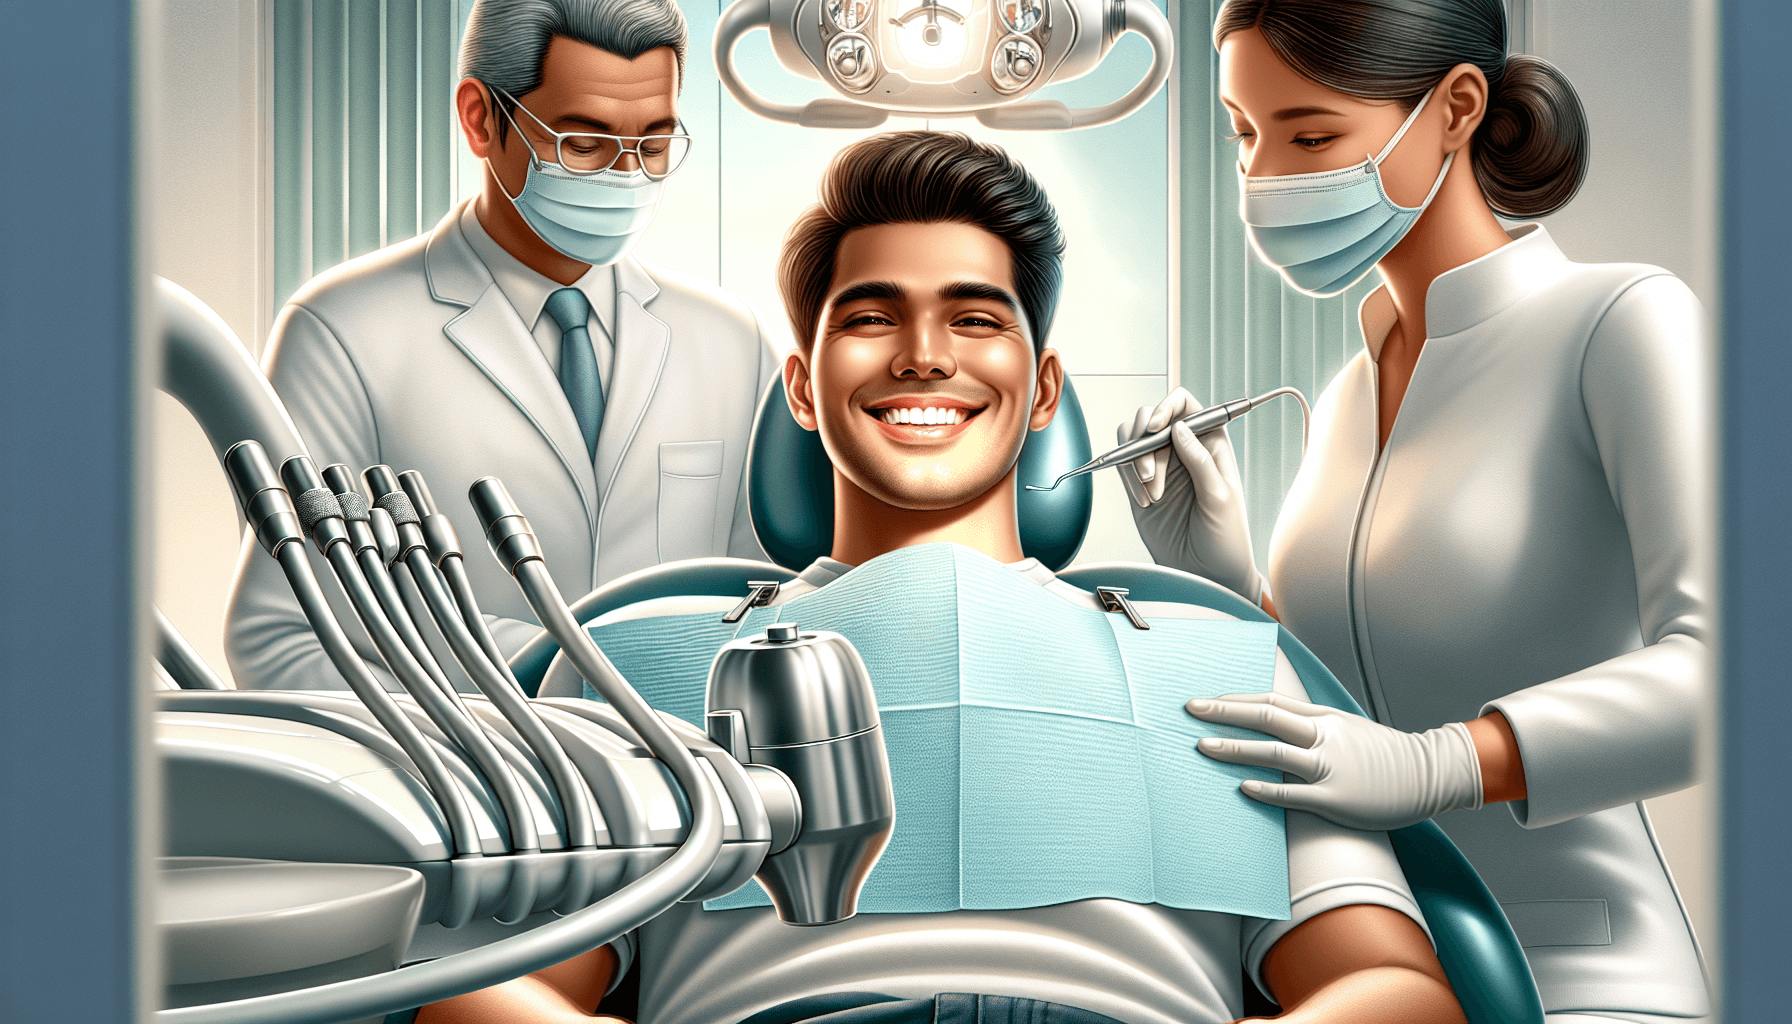 Illustration of a smiling patient receiving nitrous oxide during a dental procedure